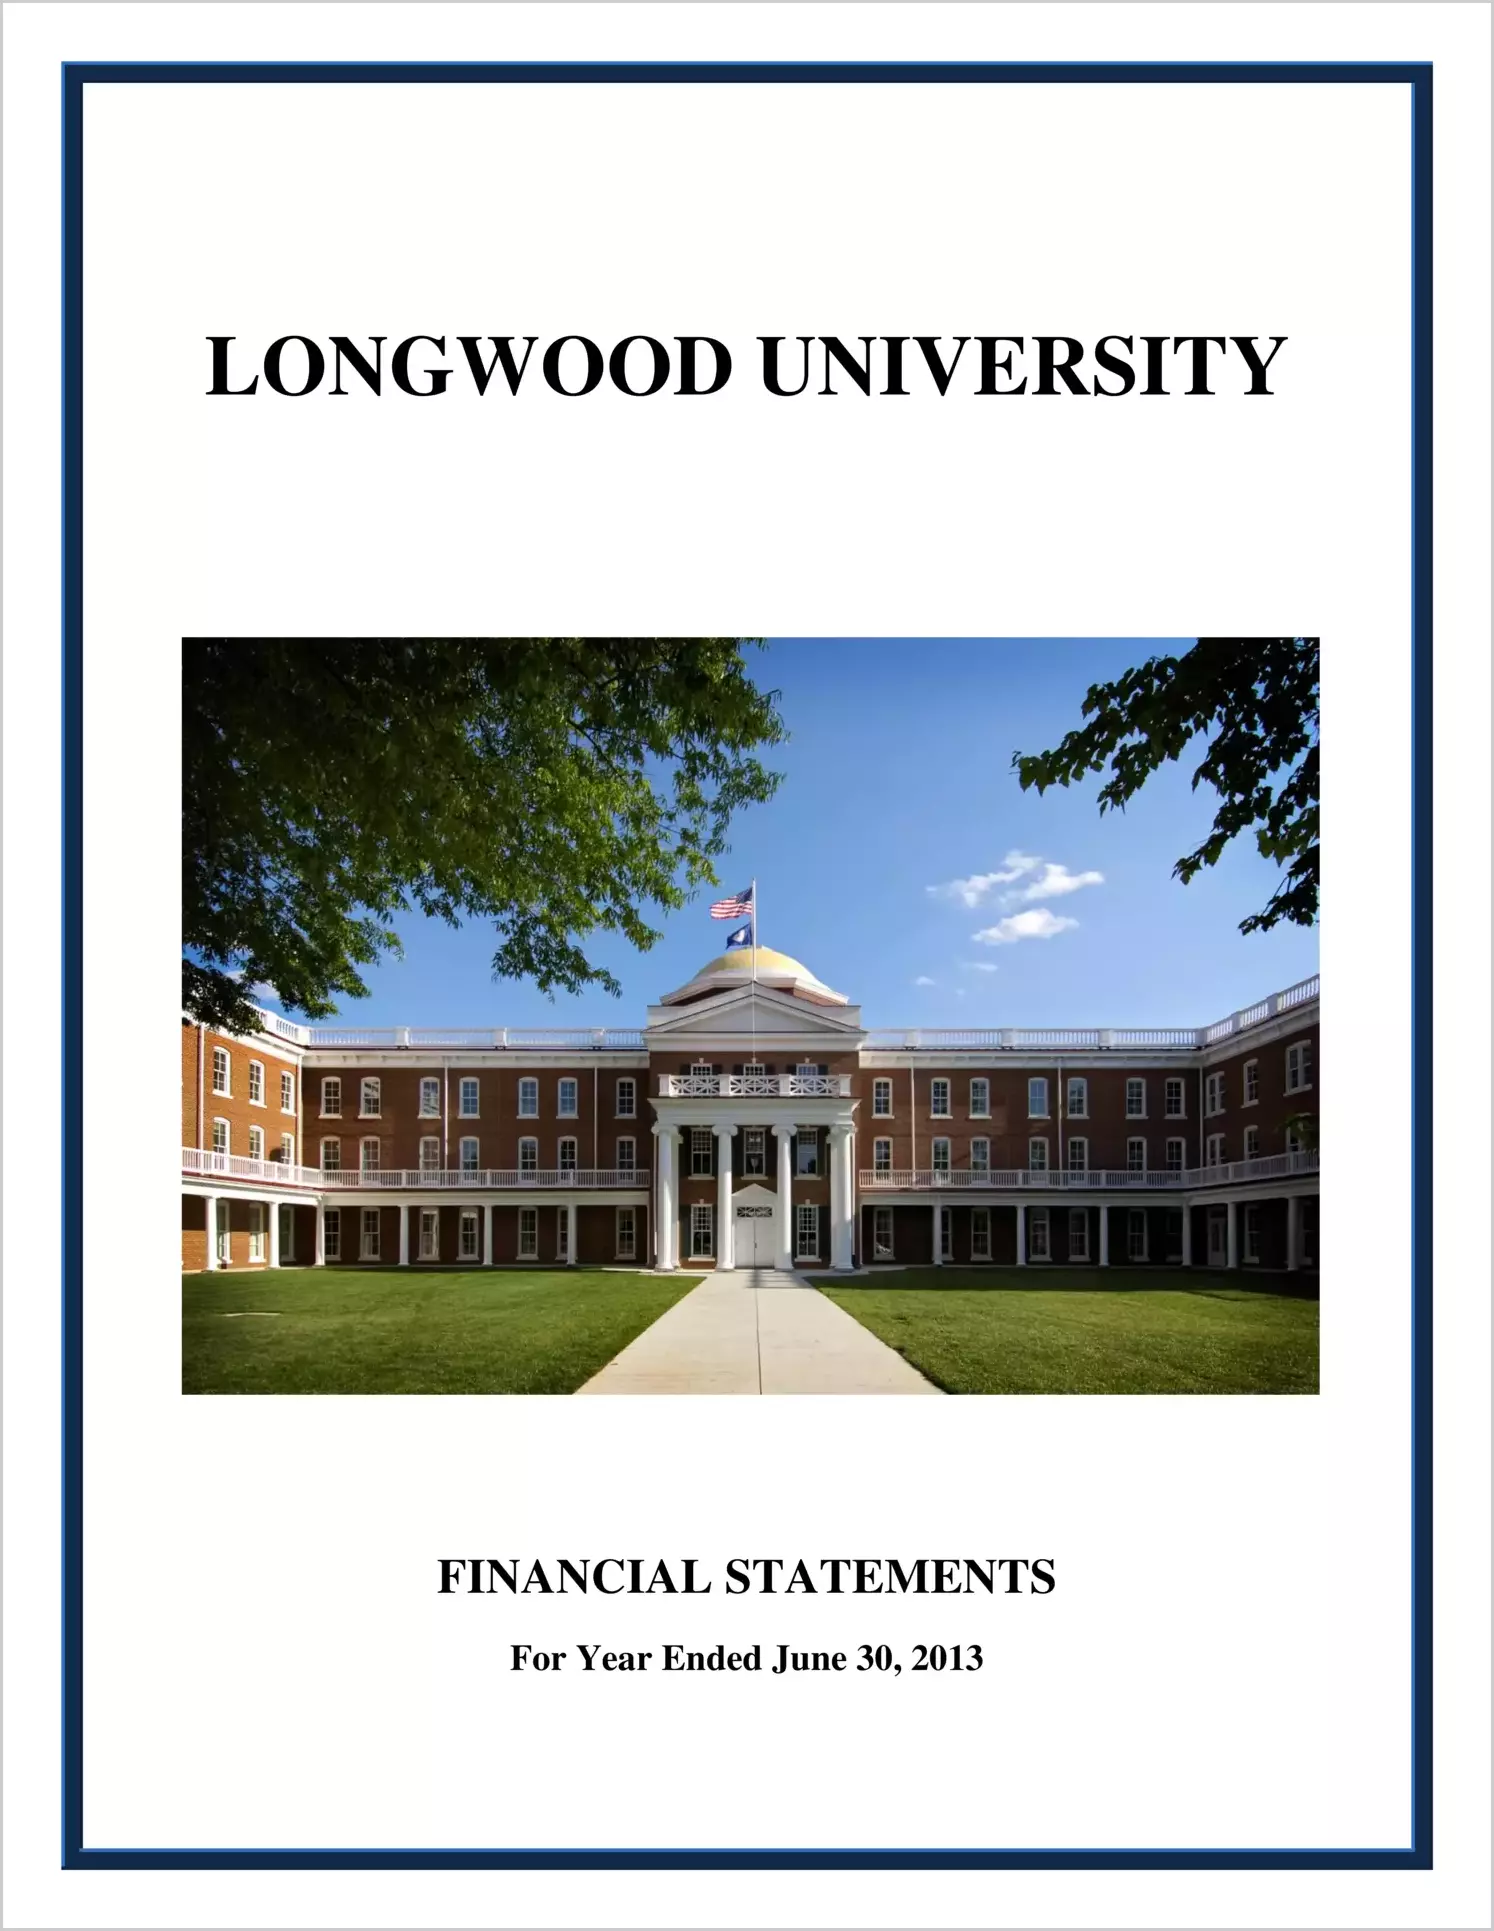 Longwood University Financial Statements for the year ended June 30, 2013